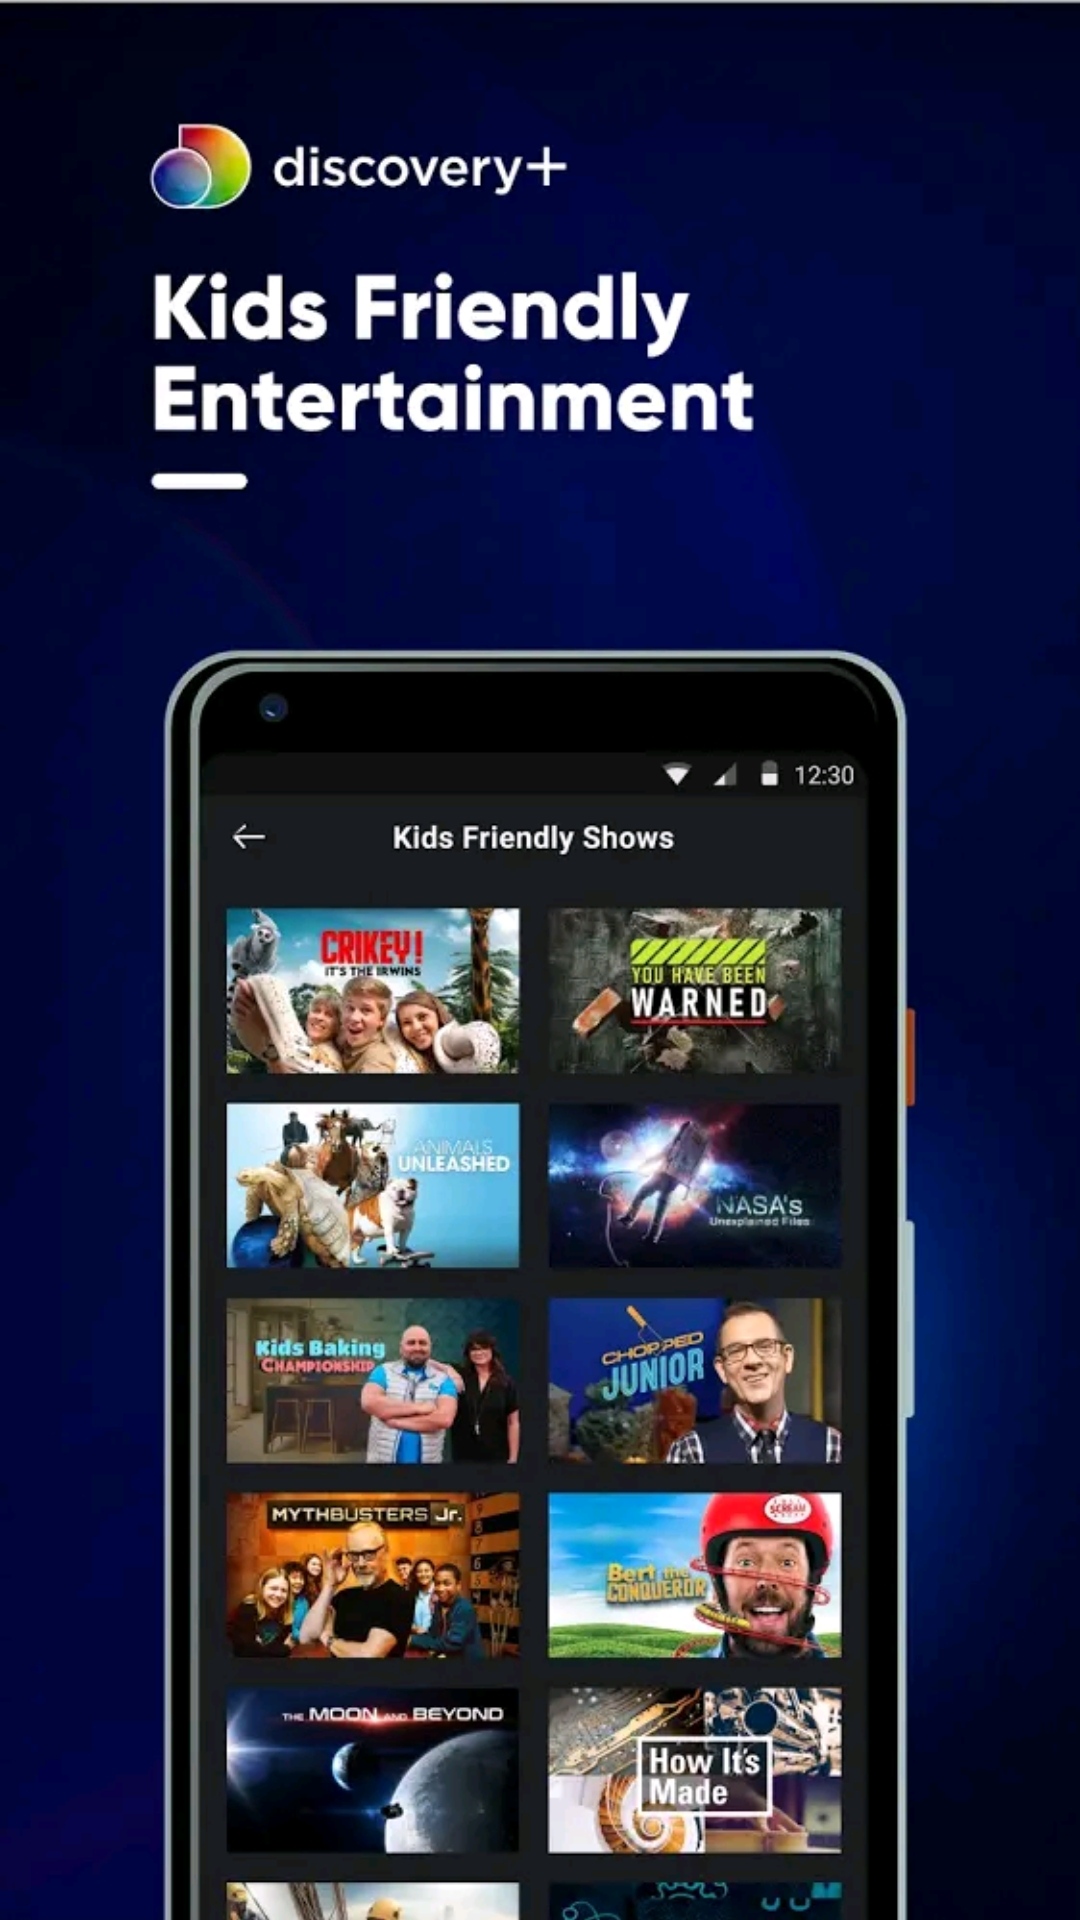 Discovery+ Video Streaming App